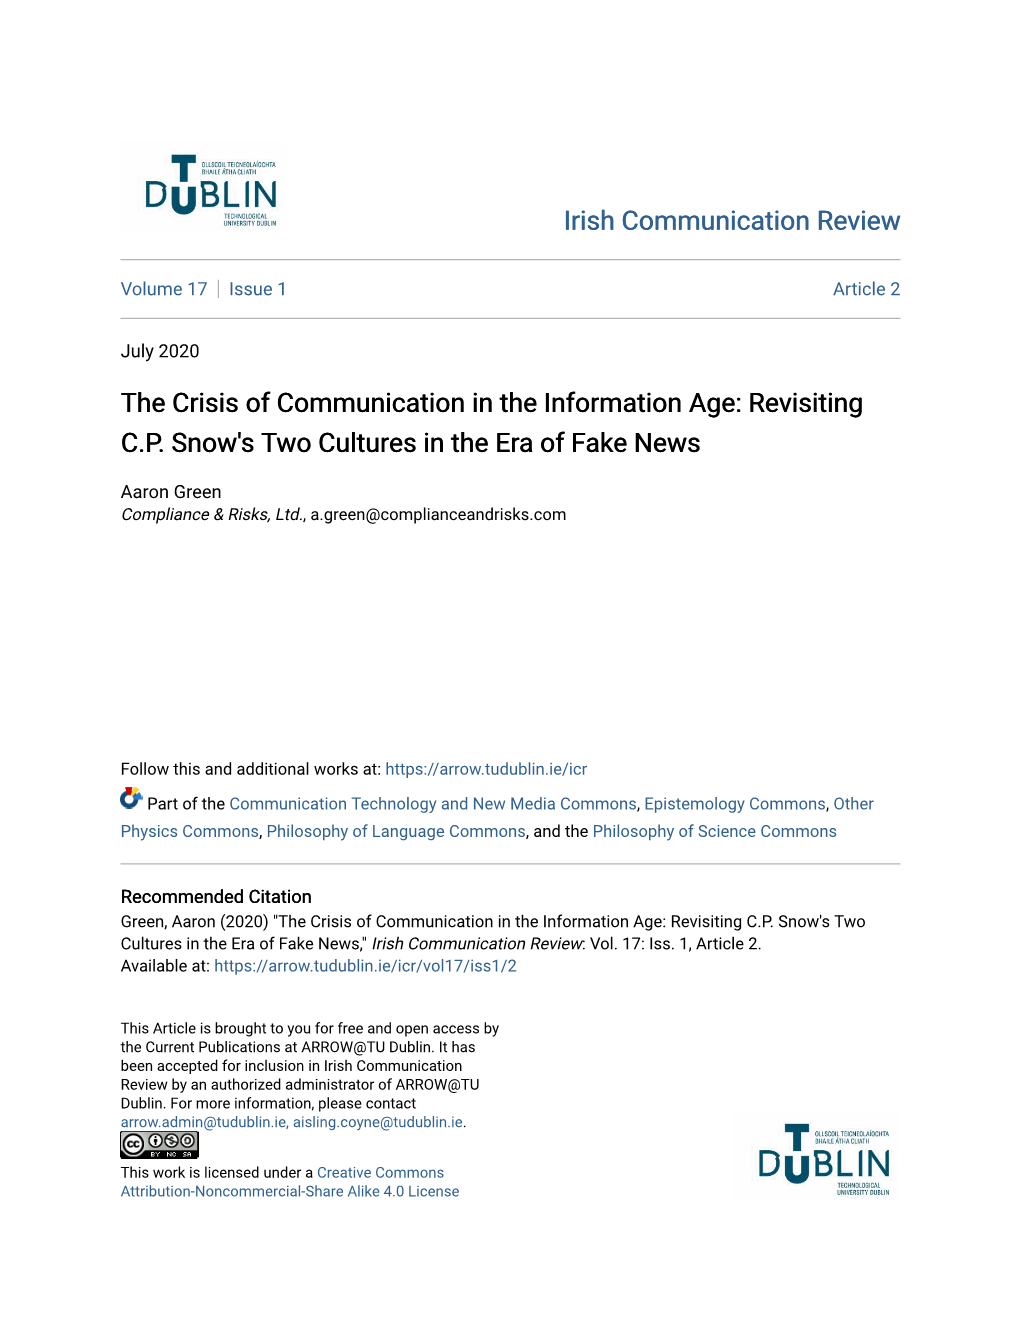 The Crisis of Communication in the Information Age: Revisiting C.P. Snow's Two Cultures in the Era of Fake News